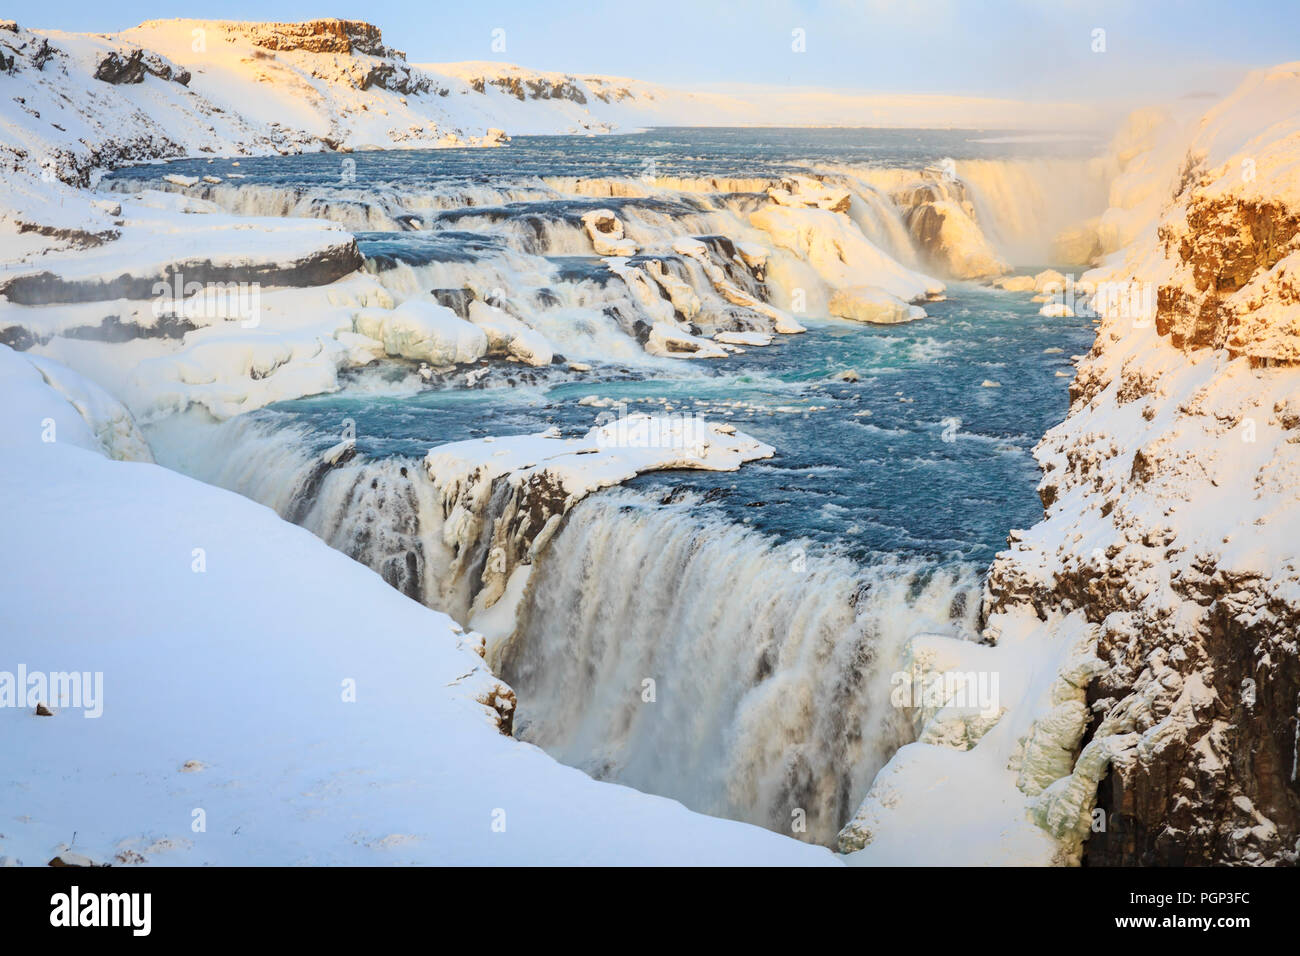 Gullfoss waterfalls located along the golden circle route, Iceland during Winter season. Ice, snow, water and sunset. Stock Photo